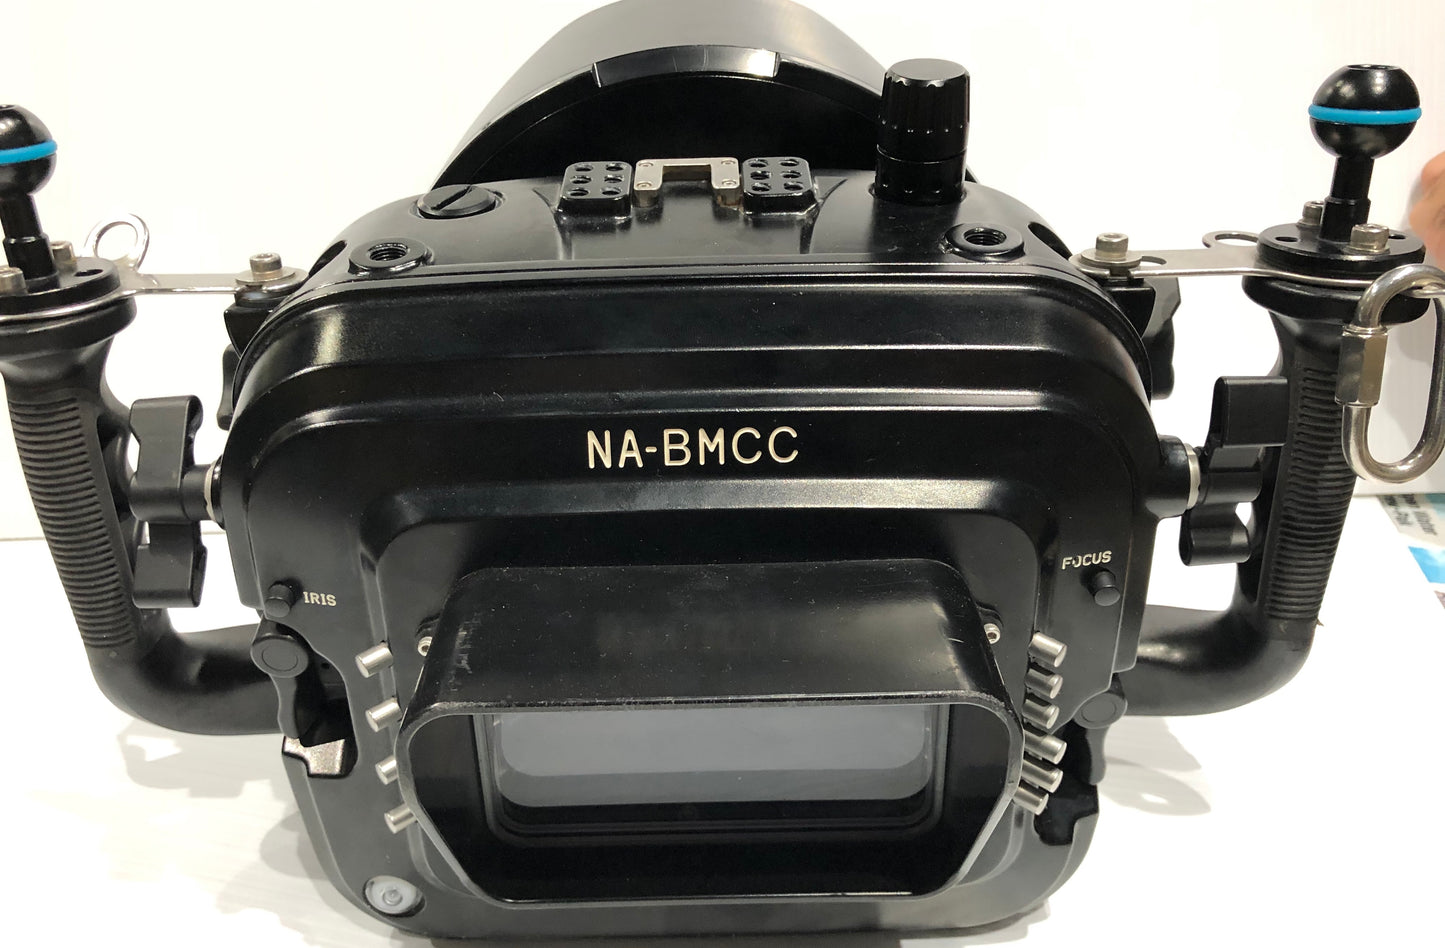 Used 4K Blackmagic Cinema Camera Underwater Package with Housing and Dome Sale Price - the Original 4k